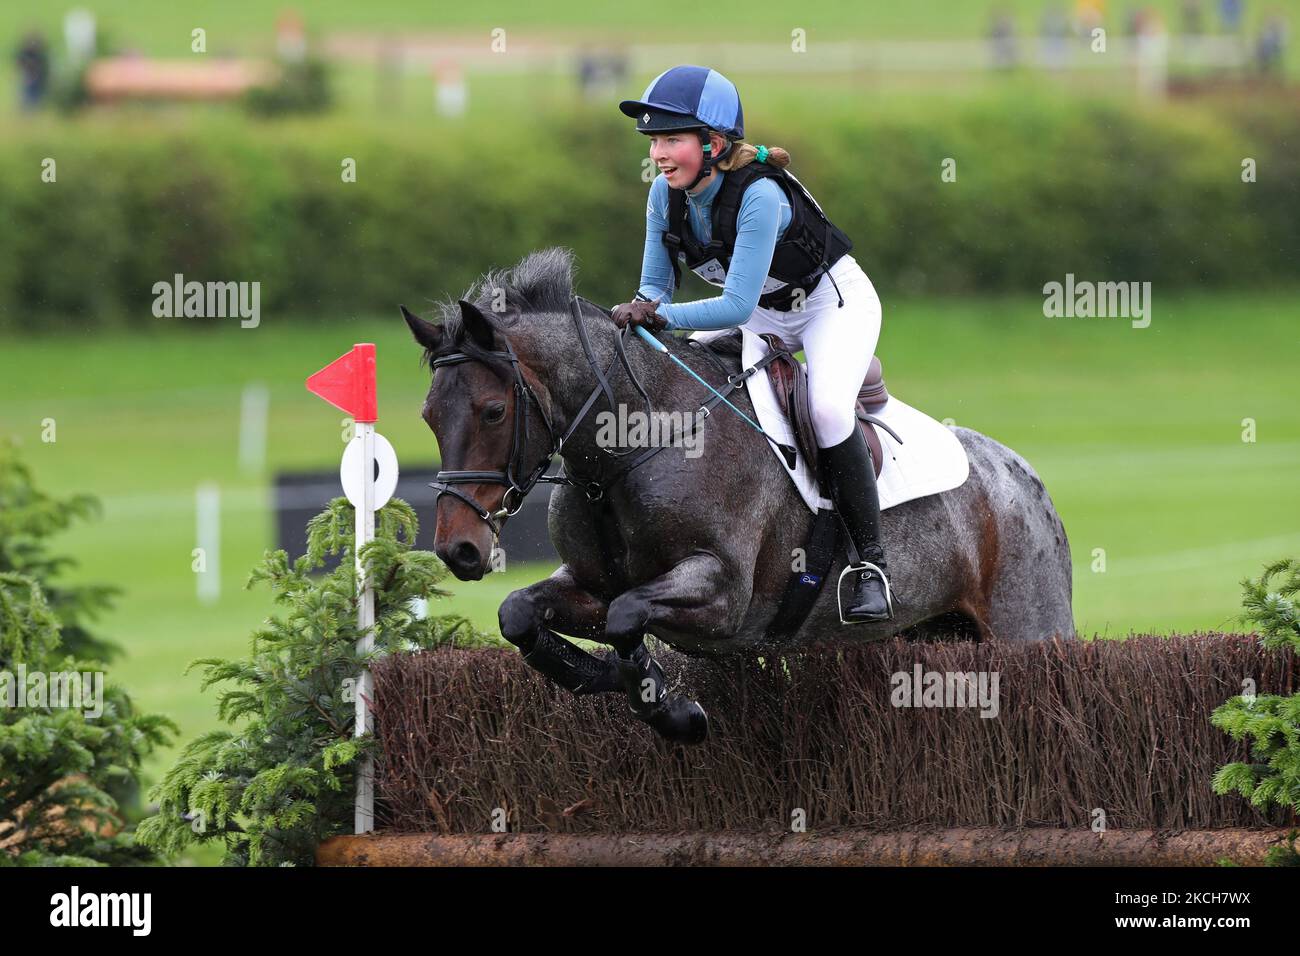 MARLBOROUGH, UK. JULY 10TH. Alexandra Horne riding Burley Morse during PT Section M Cross Country event at the Barbury Castle International Horse Trials, Marlborough, Wiltshire, UK on Saturday 10th July 2021. (Photo by Jon Bromley/MI News/NurPhoto) Stock Photo